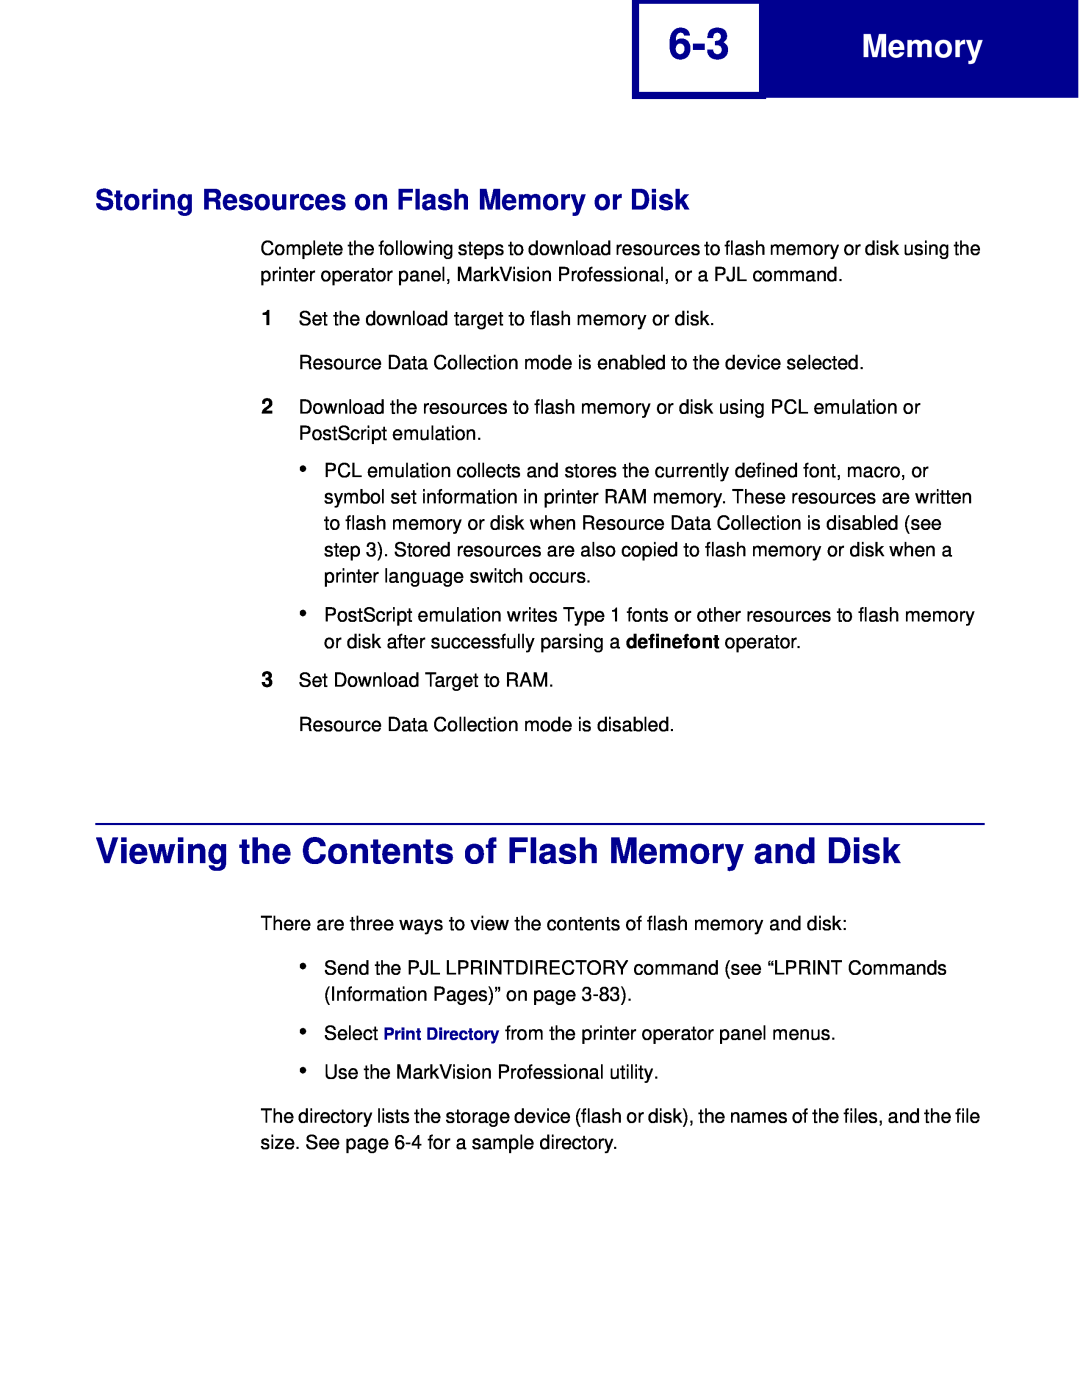 Lexmark C760, C762 manual Viewing the Contents of Flash Memory and Disk, Storing Resources on Flash Memory or Disk 